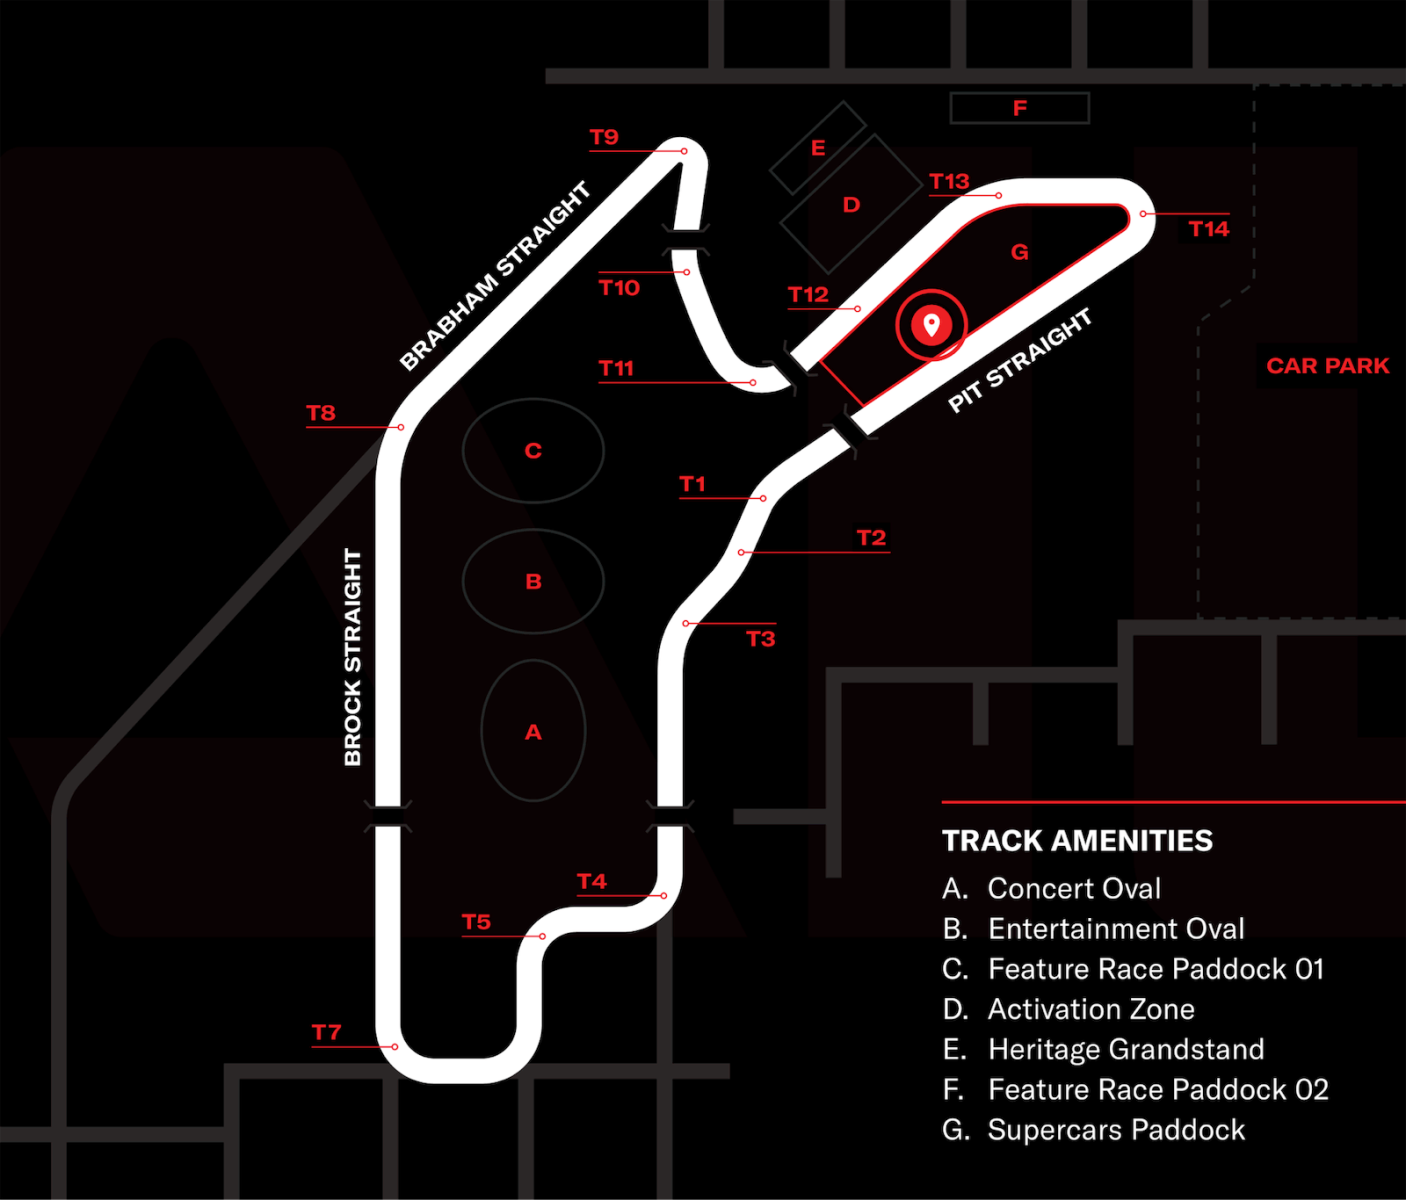 The Drivers Lounge track location map